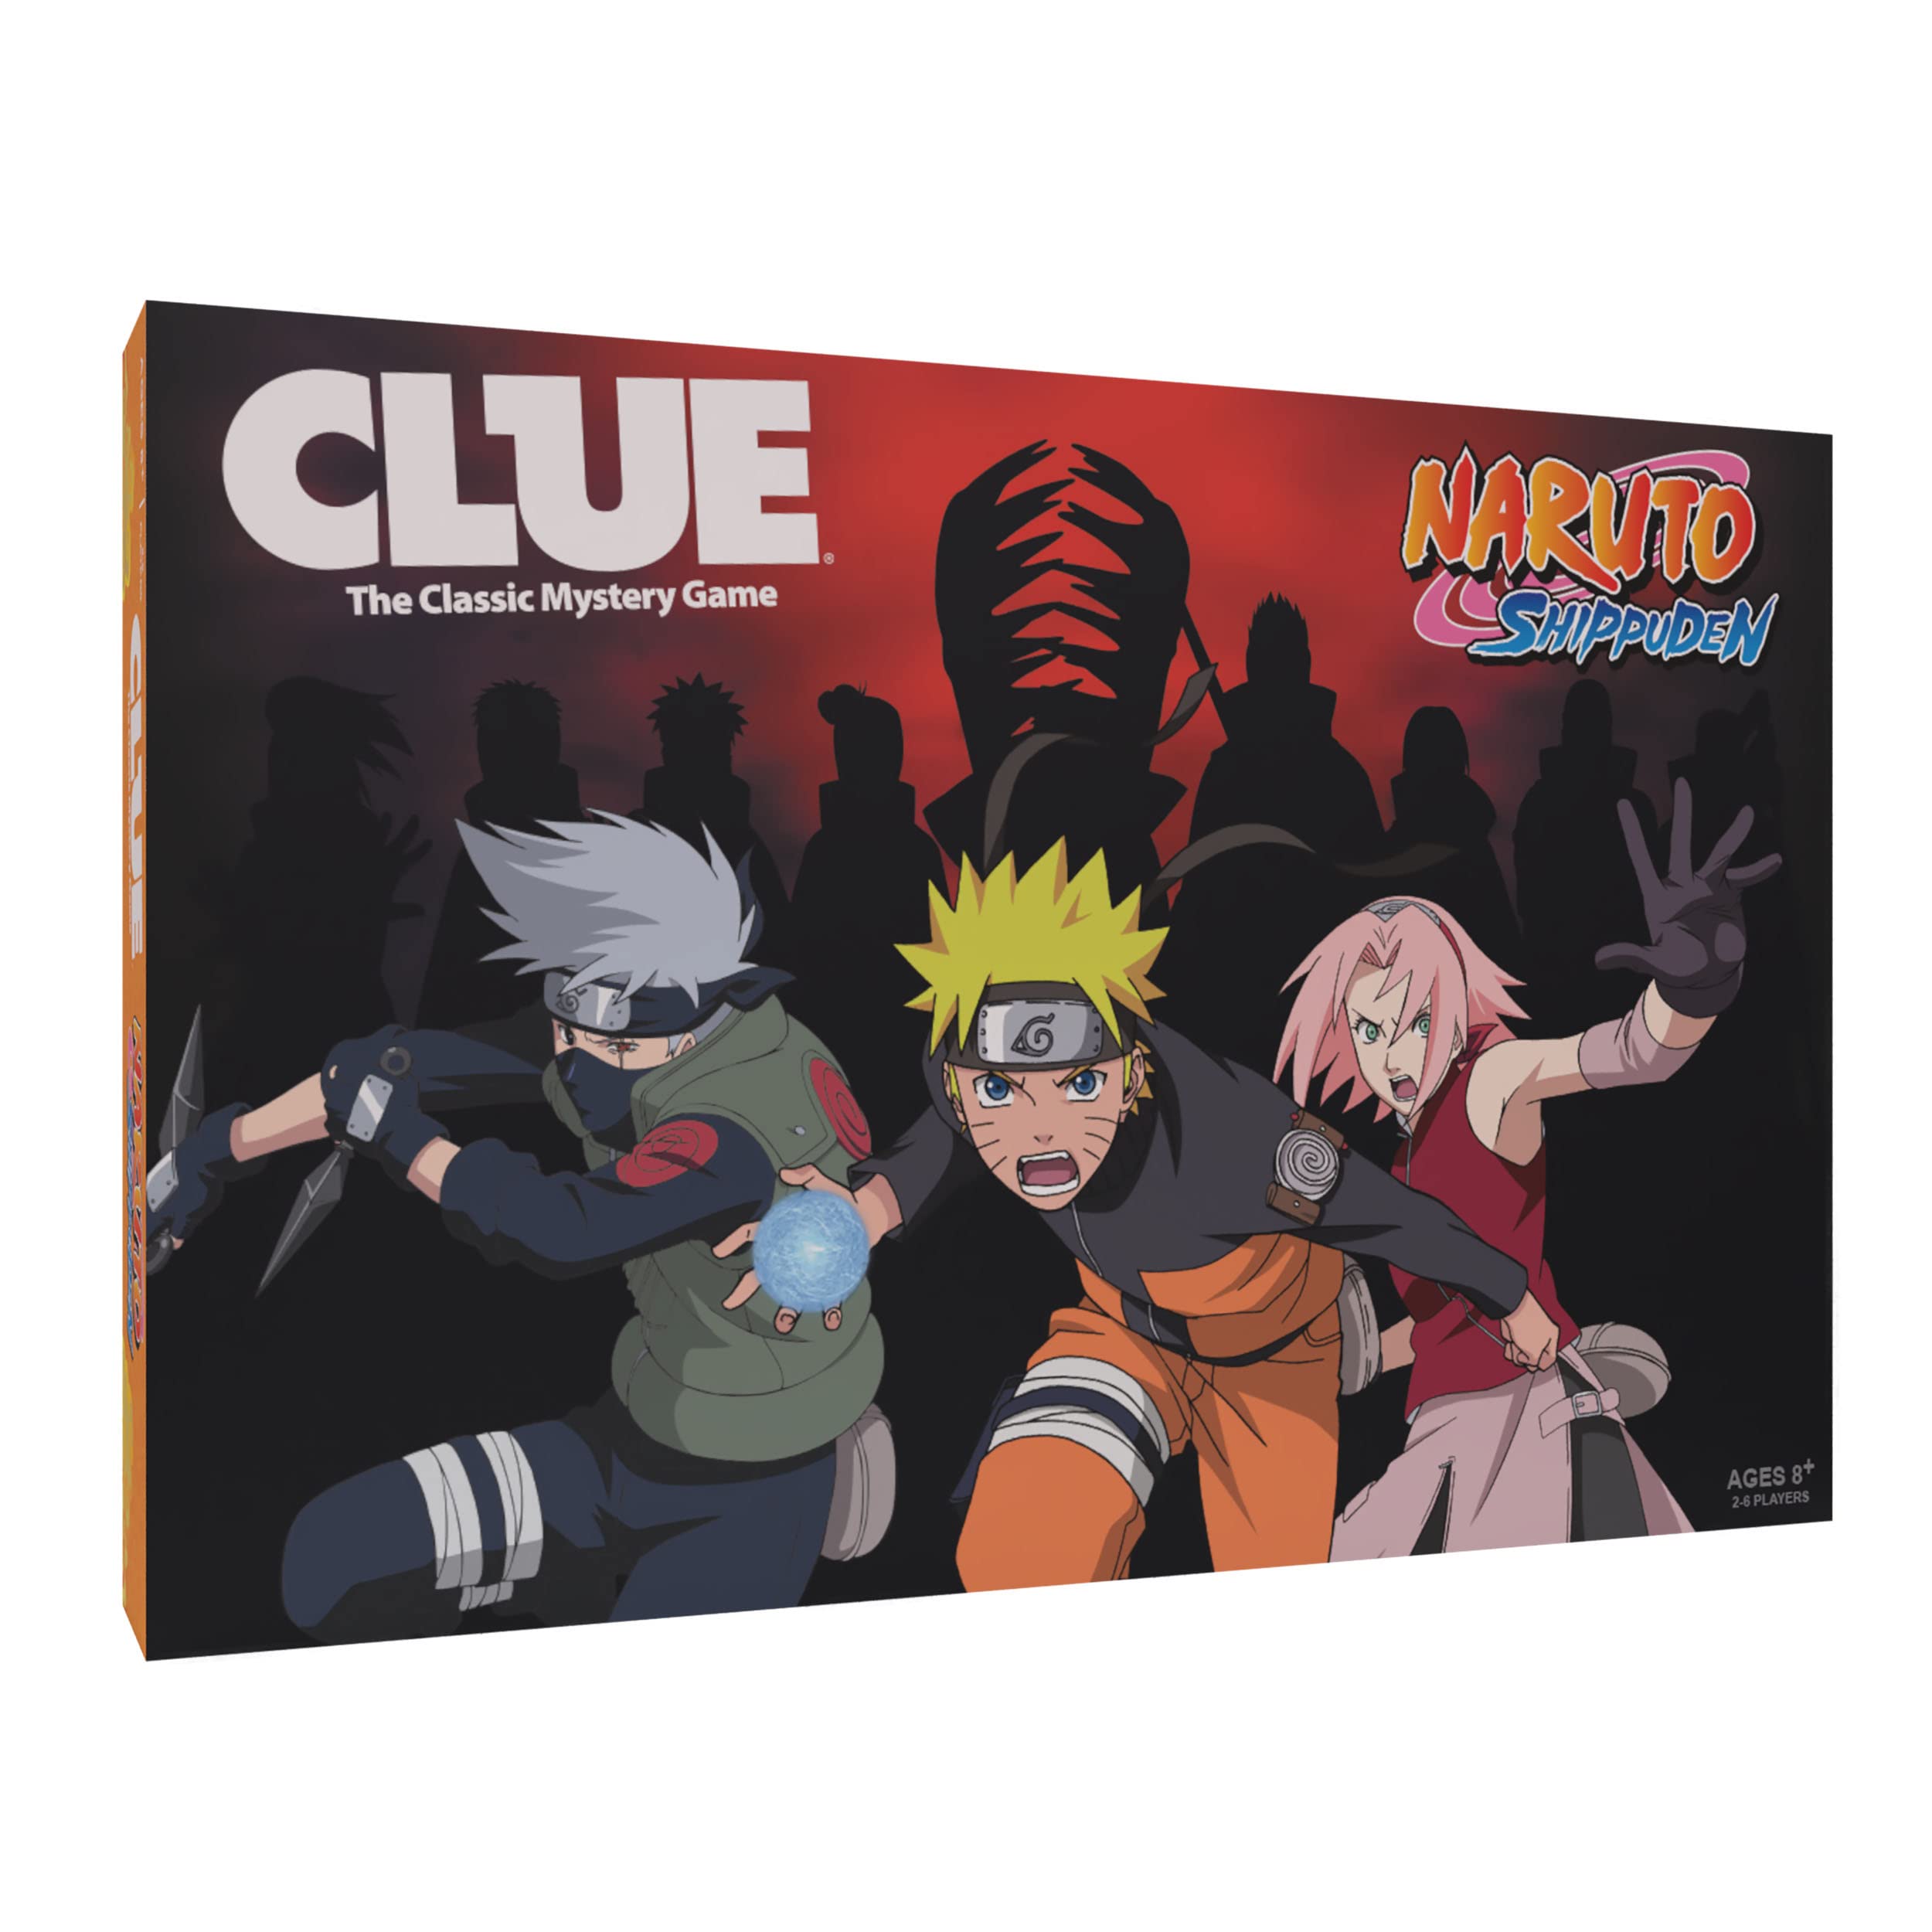 USAOPOLY CLUE: Naruto | Solve The Mystery in This Collectible Clue Game | Featuring Characters & Locations from The Anime TV Show Naruto | Officially-Licensed Naruto TV Show Game & Merchandise